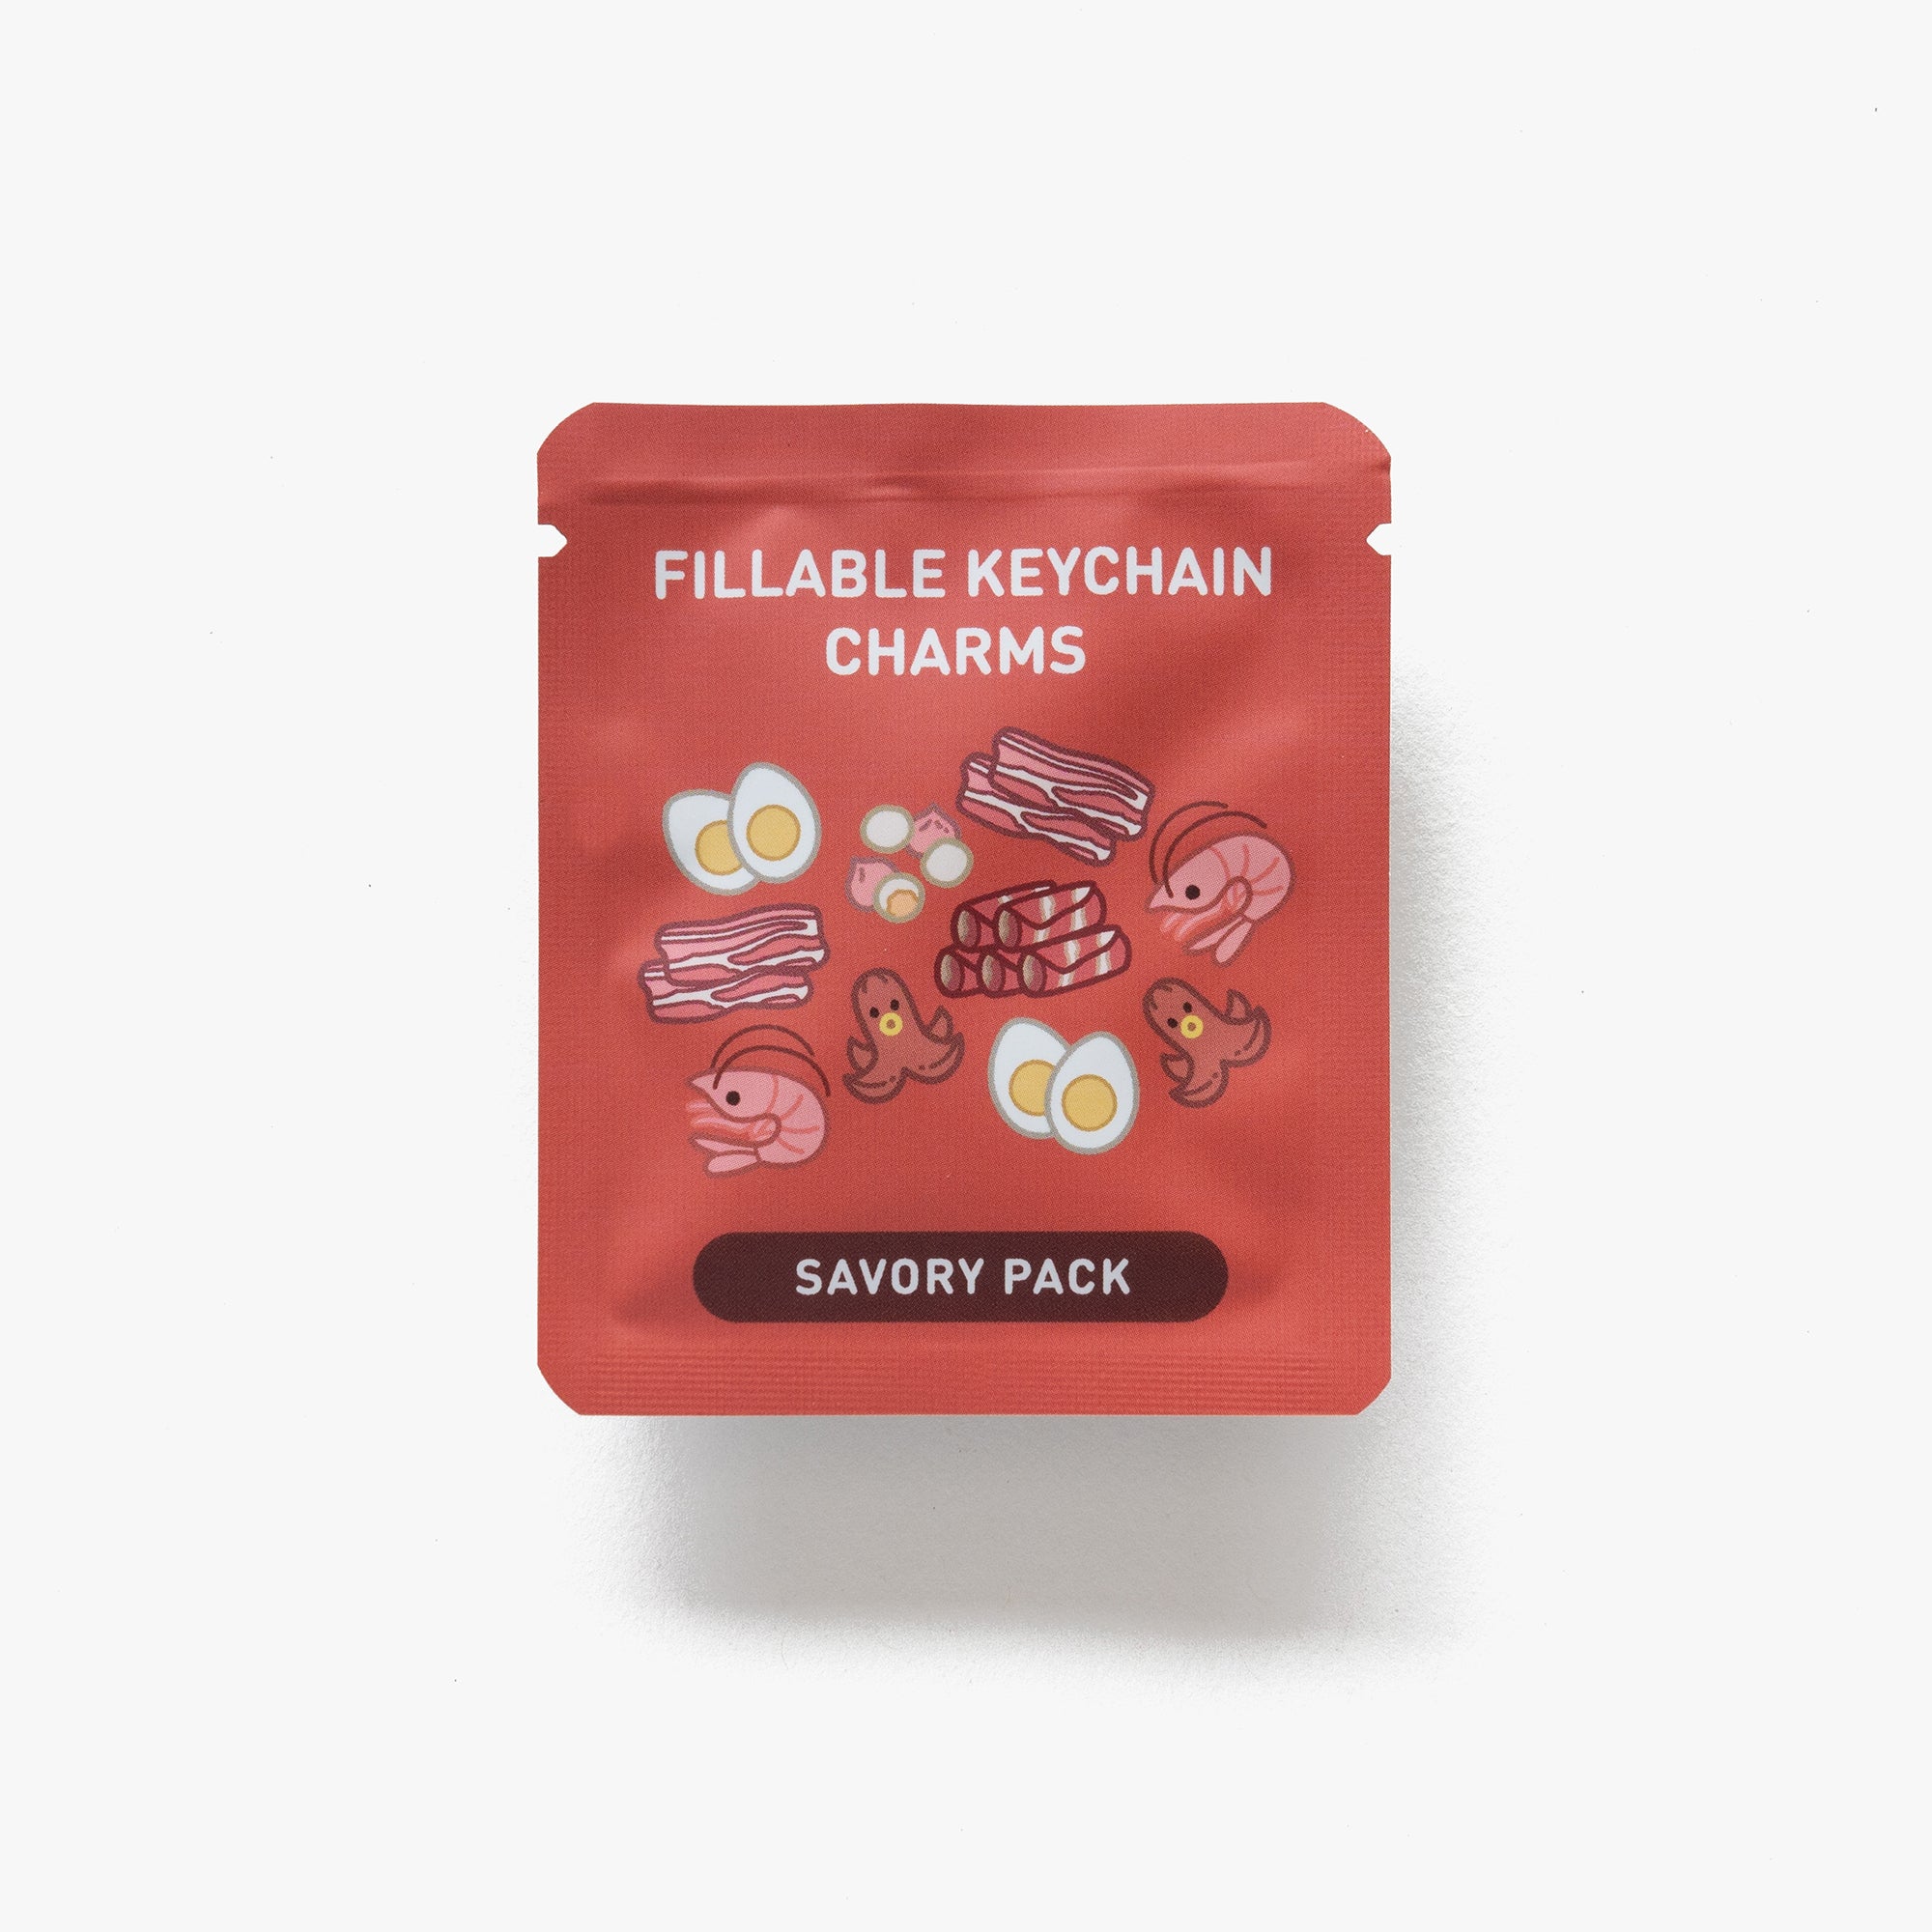 Hot Pot Fillable Keychain Charms Booster Packs